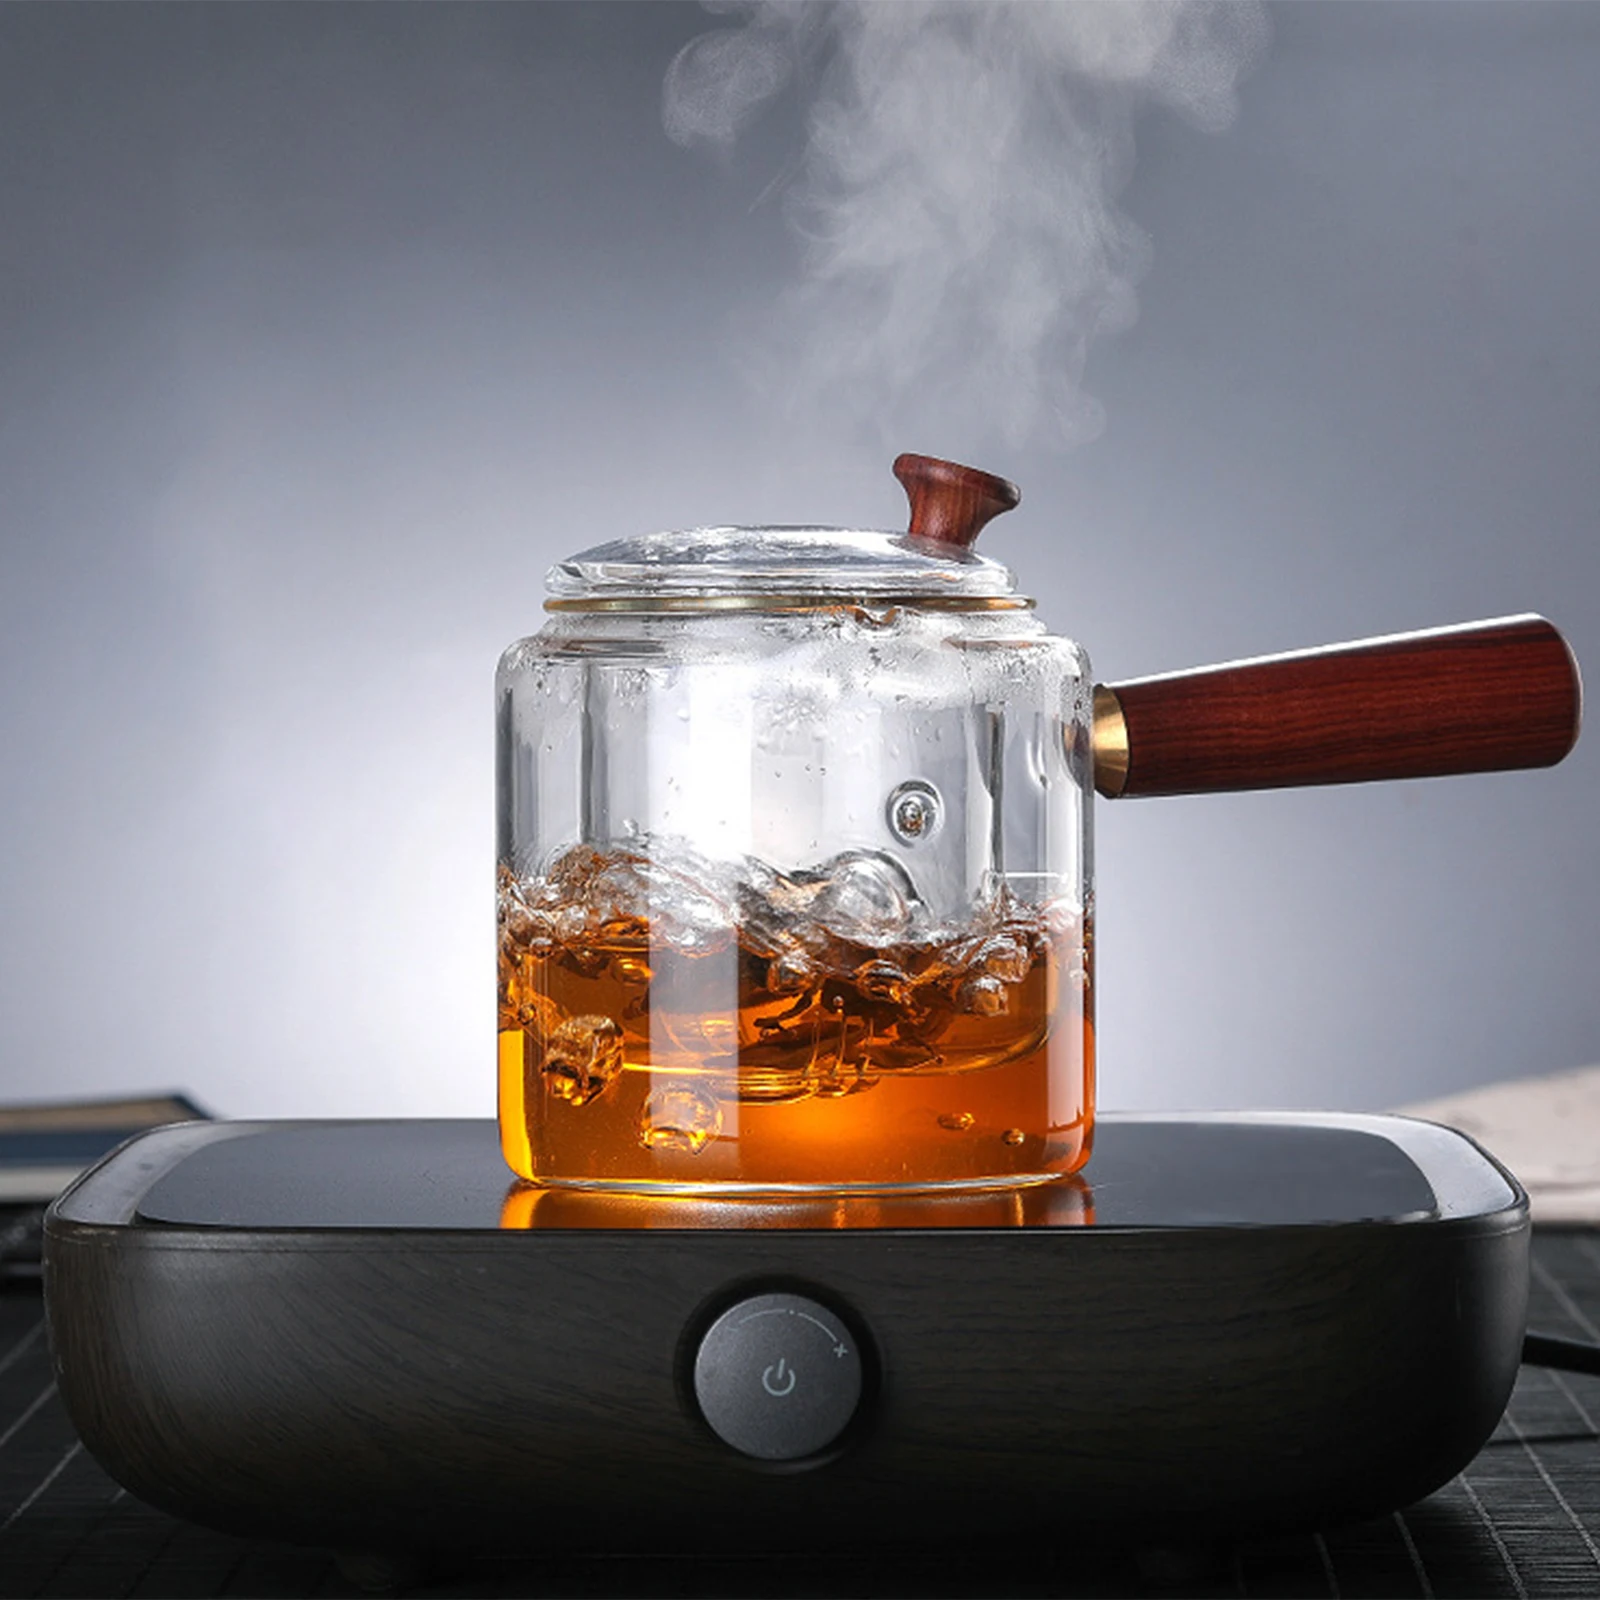 https://ae01.alicdn.com/kf/S0dc2e8d37bc8437996fb3c573d4188203/500ml-Glass-Teapot-for-Steaming-and-Cooking-Electric-with-Infuser-Tea-Pot-Flowering-Teapot-17-Kettle.jpg